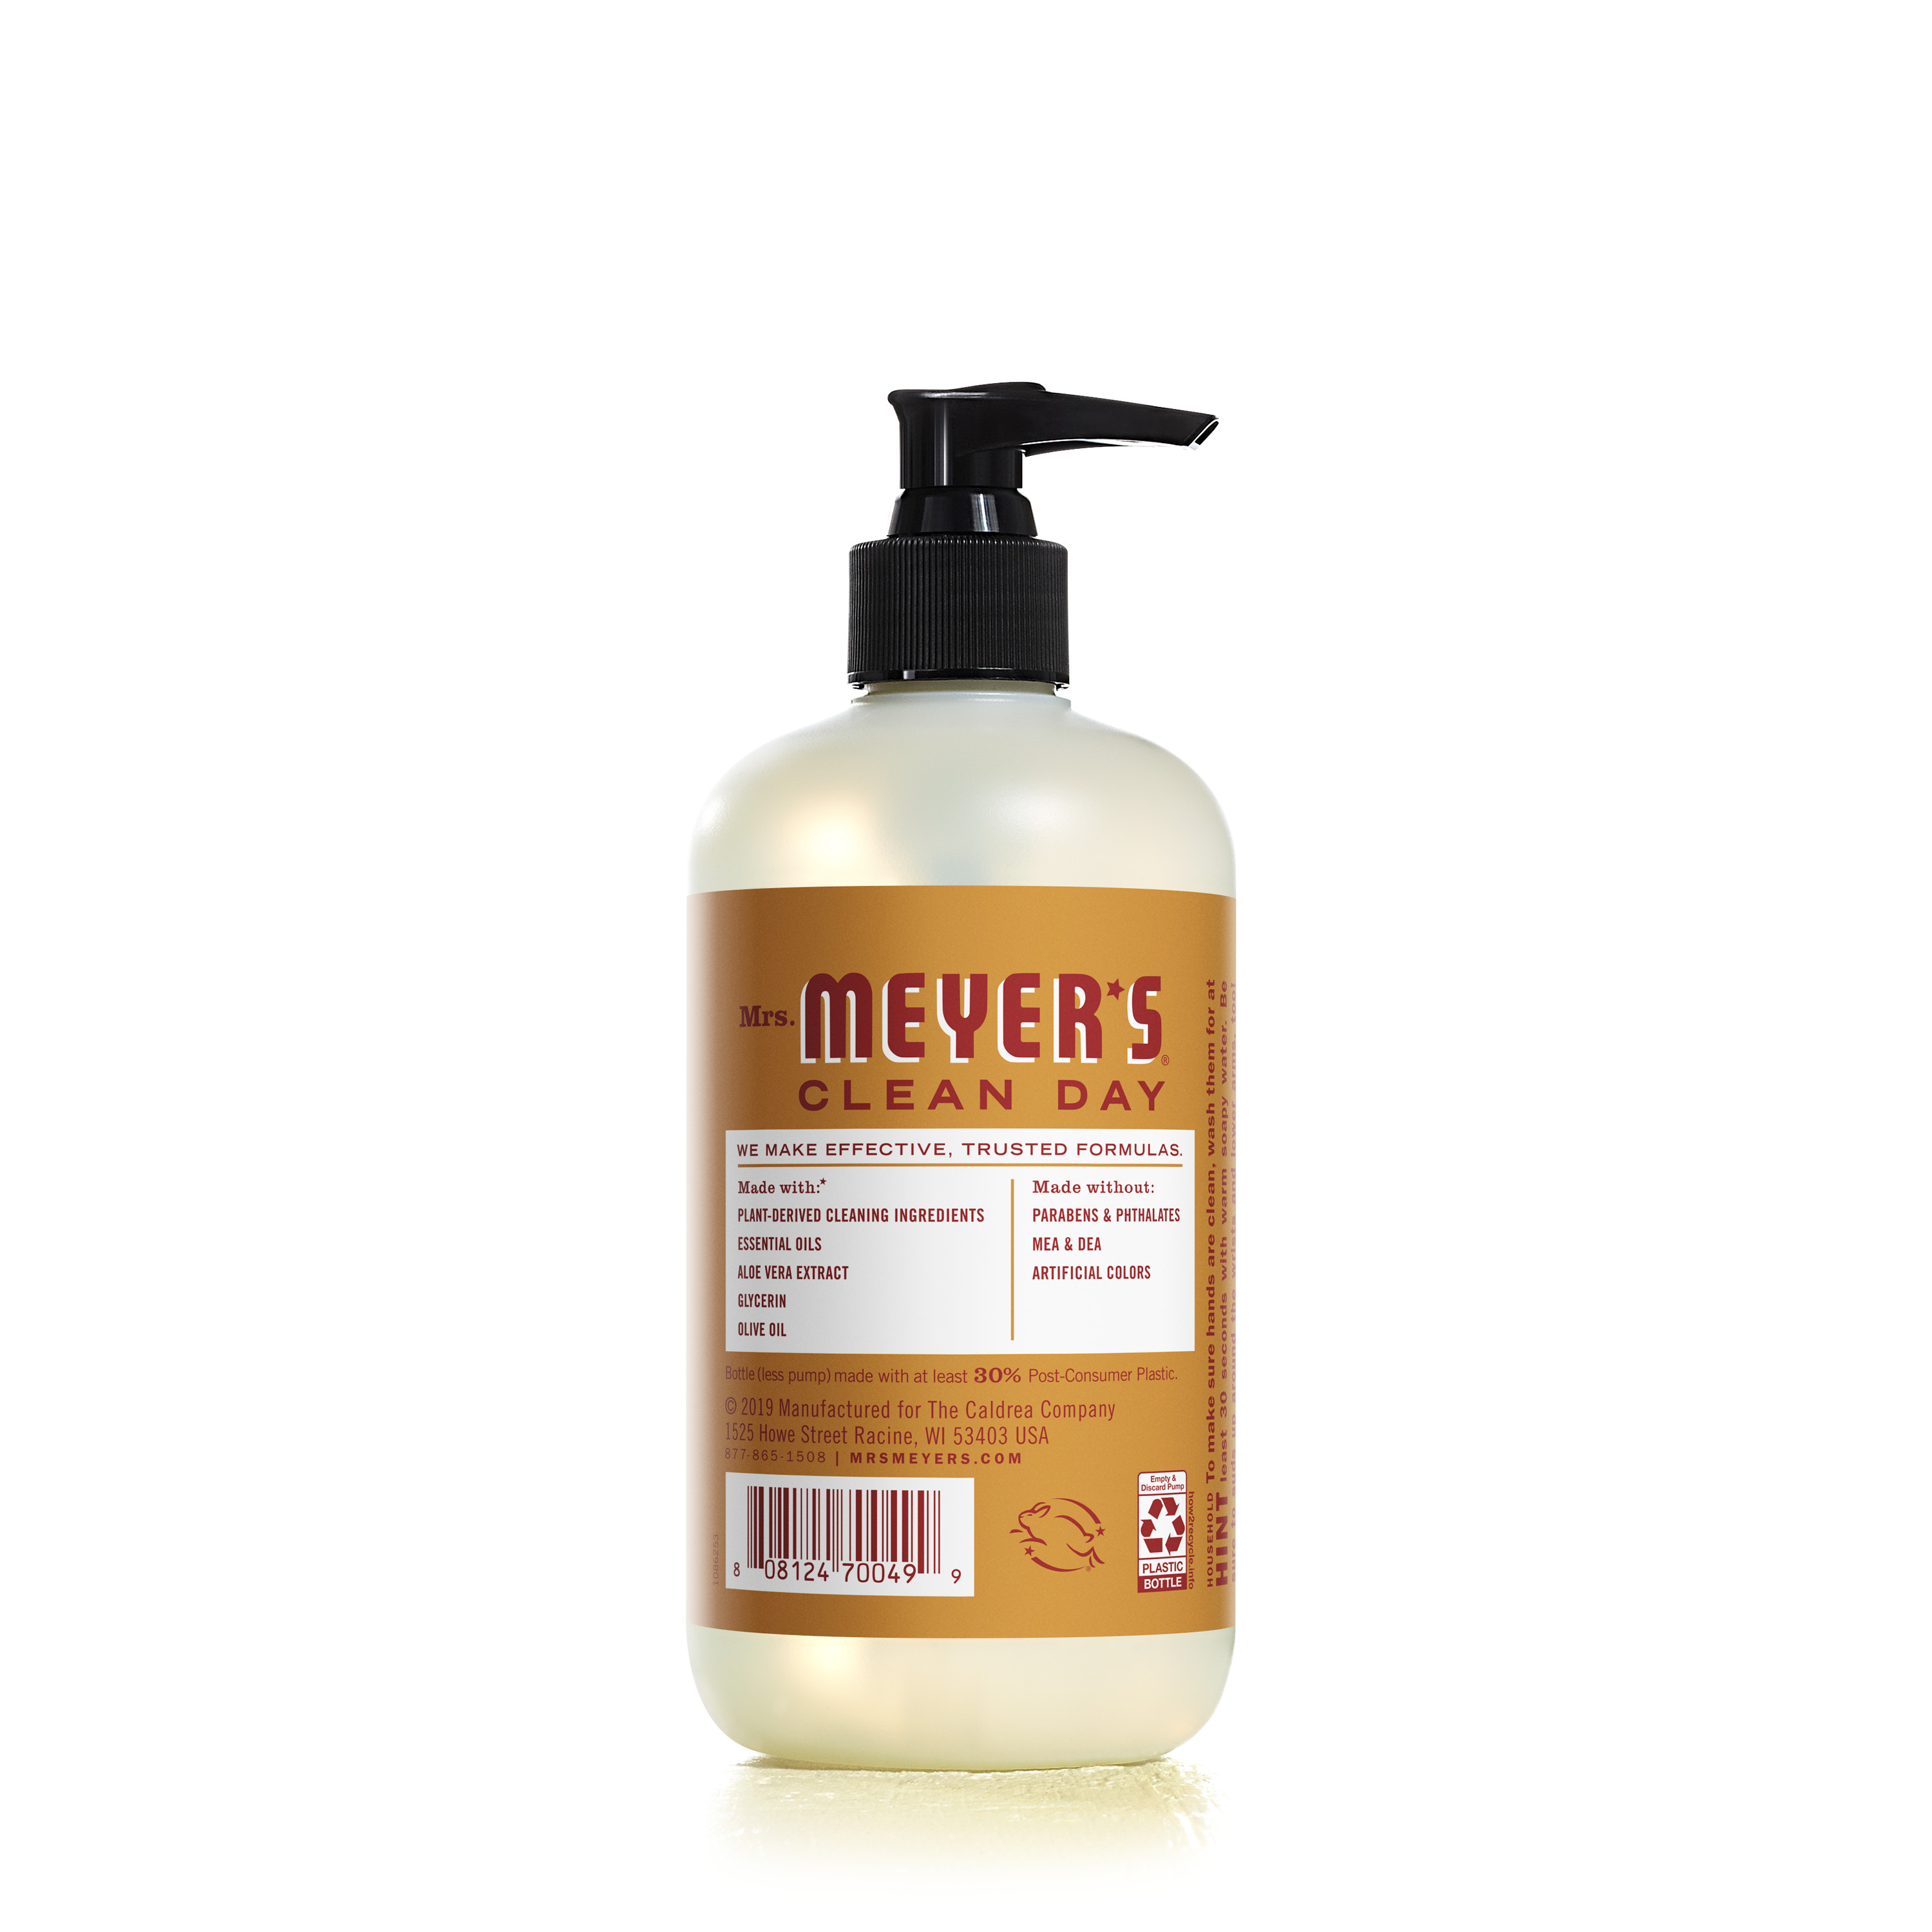 Mrs. Meyer's Clean Day Liquid Hand Soap, Apple Cider Scent, 12.5 Ounce Bottle - image 2 of 7